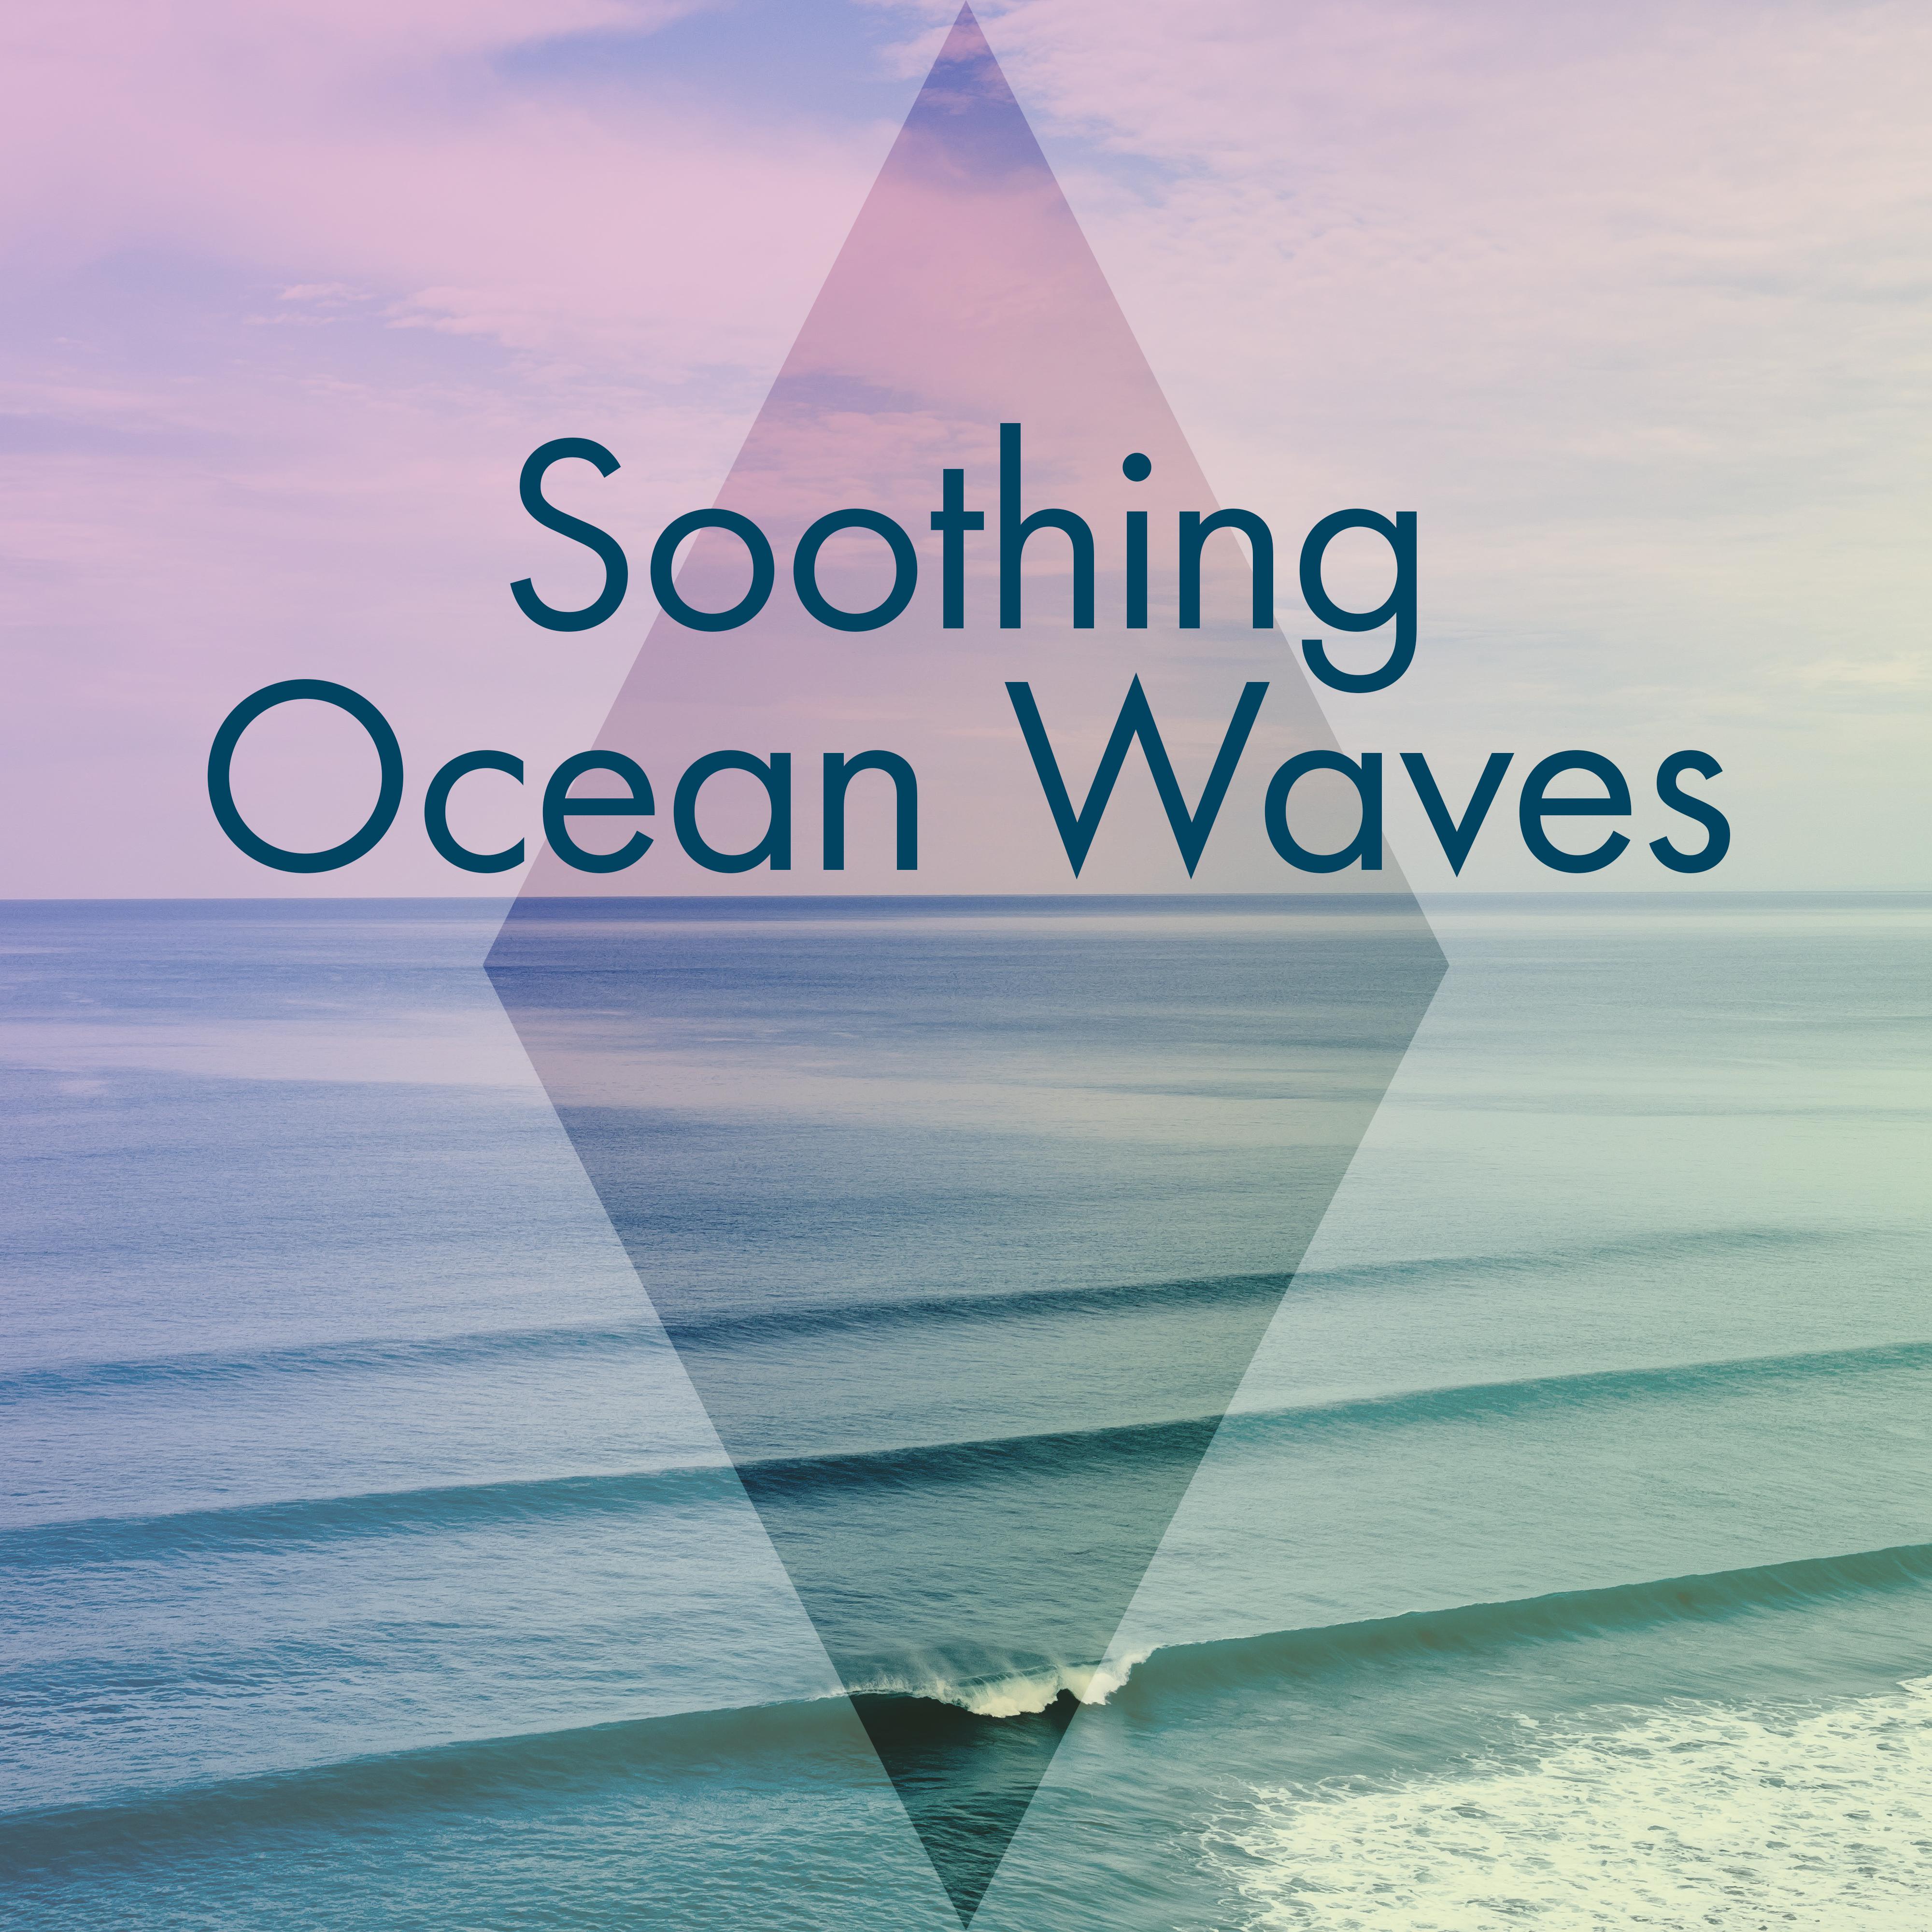 Soothing Ocean Waves – Sounds of Calmness, New Age Relaxation, Music to Relief Stress, Meditation Music